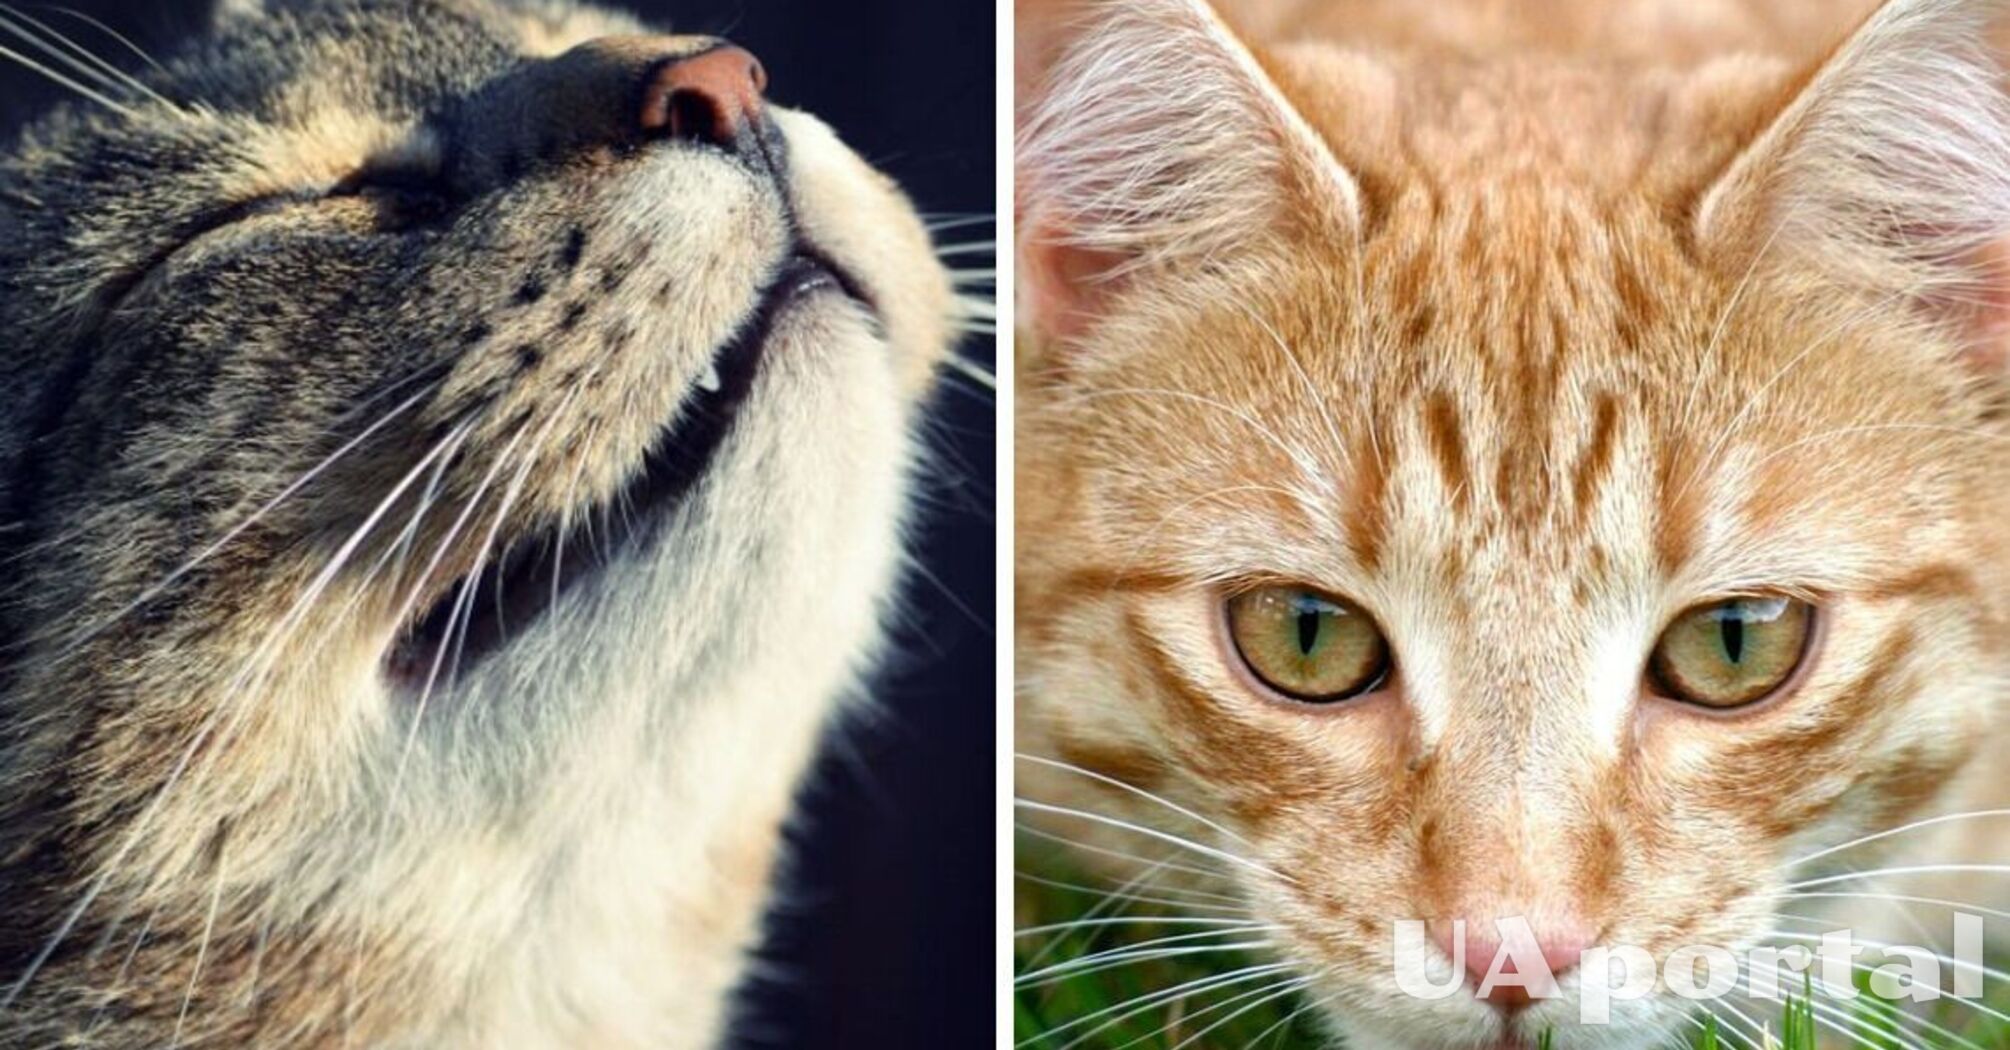 Scientists have investigated why cats have such a good sense of smell